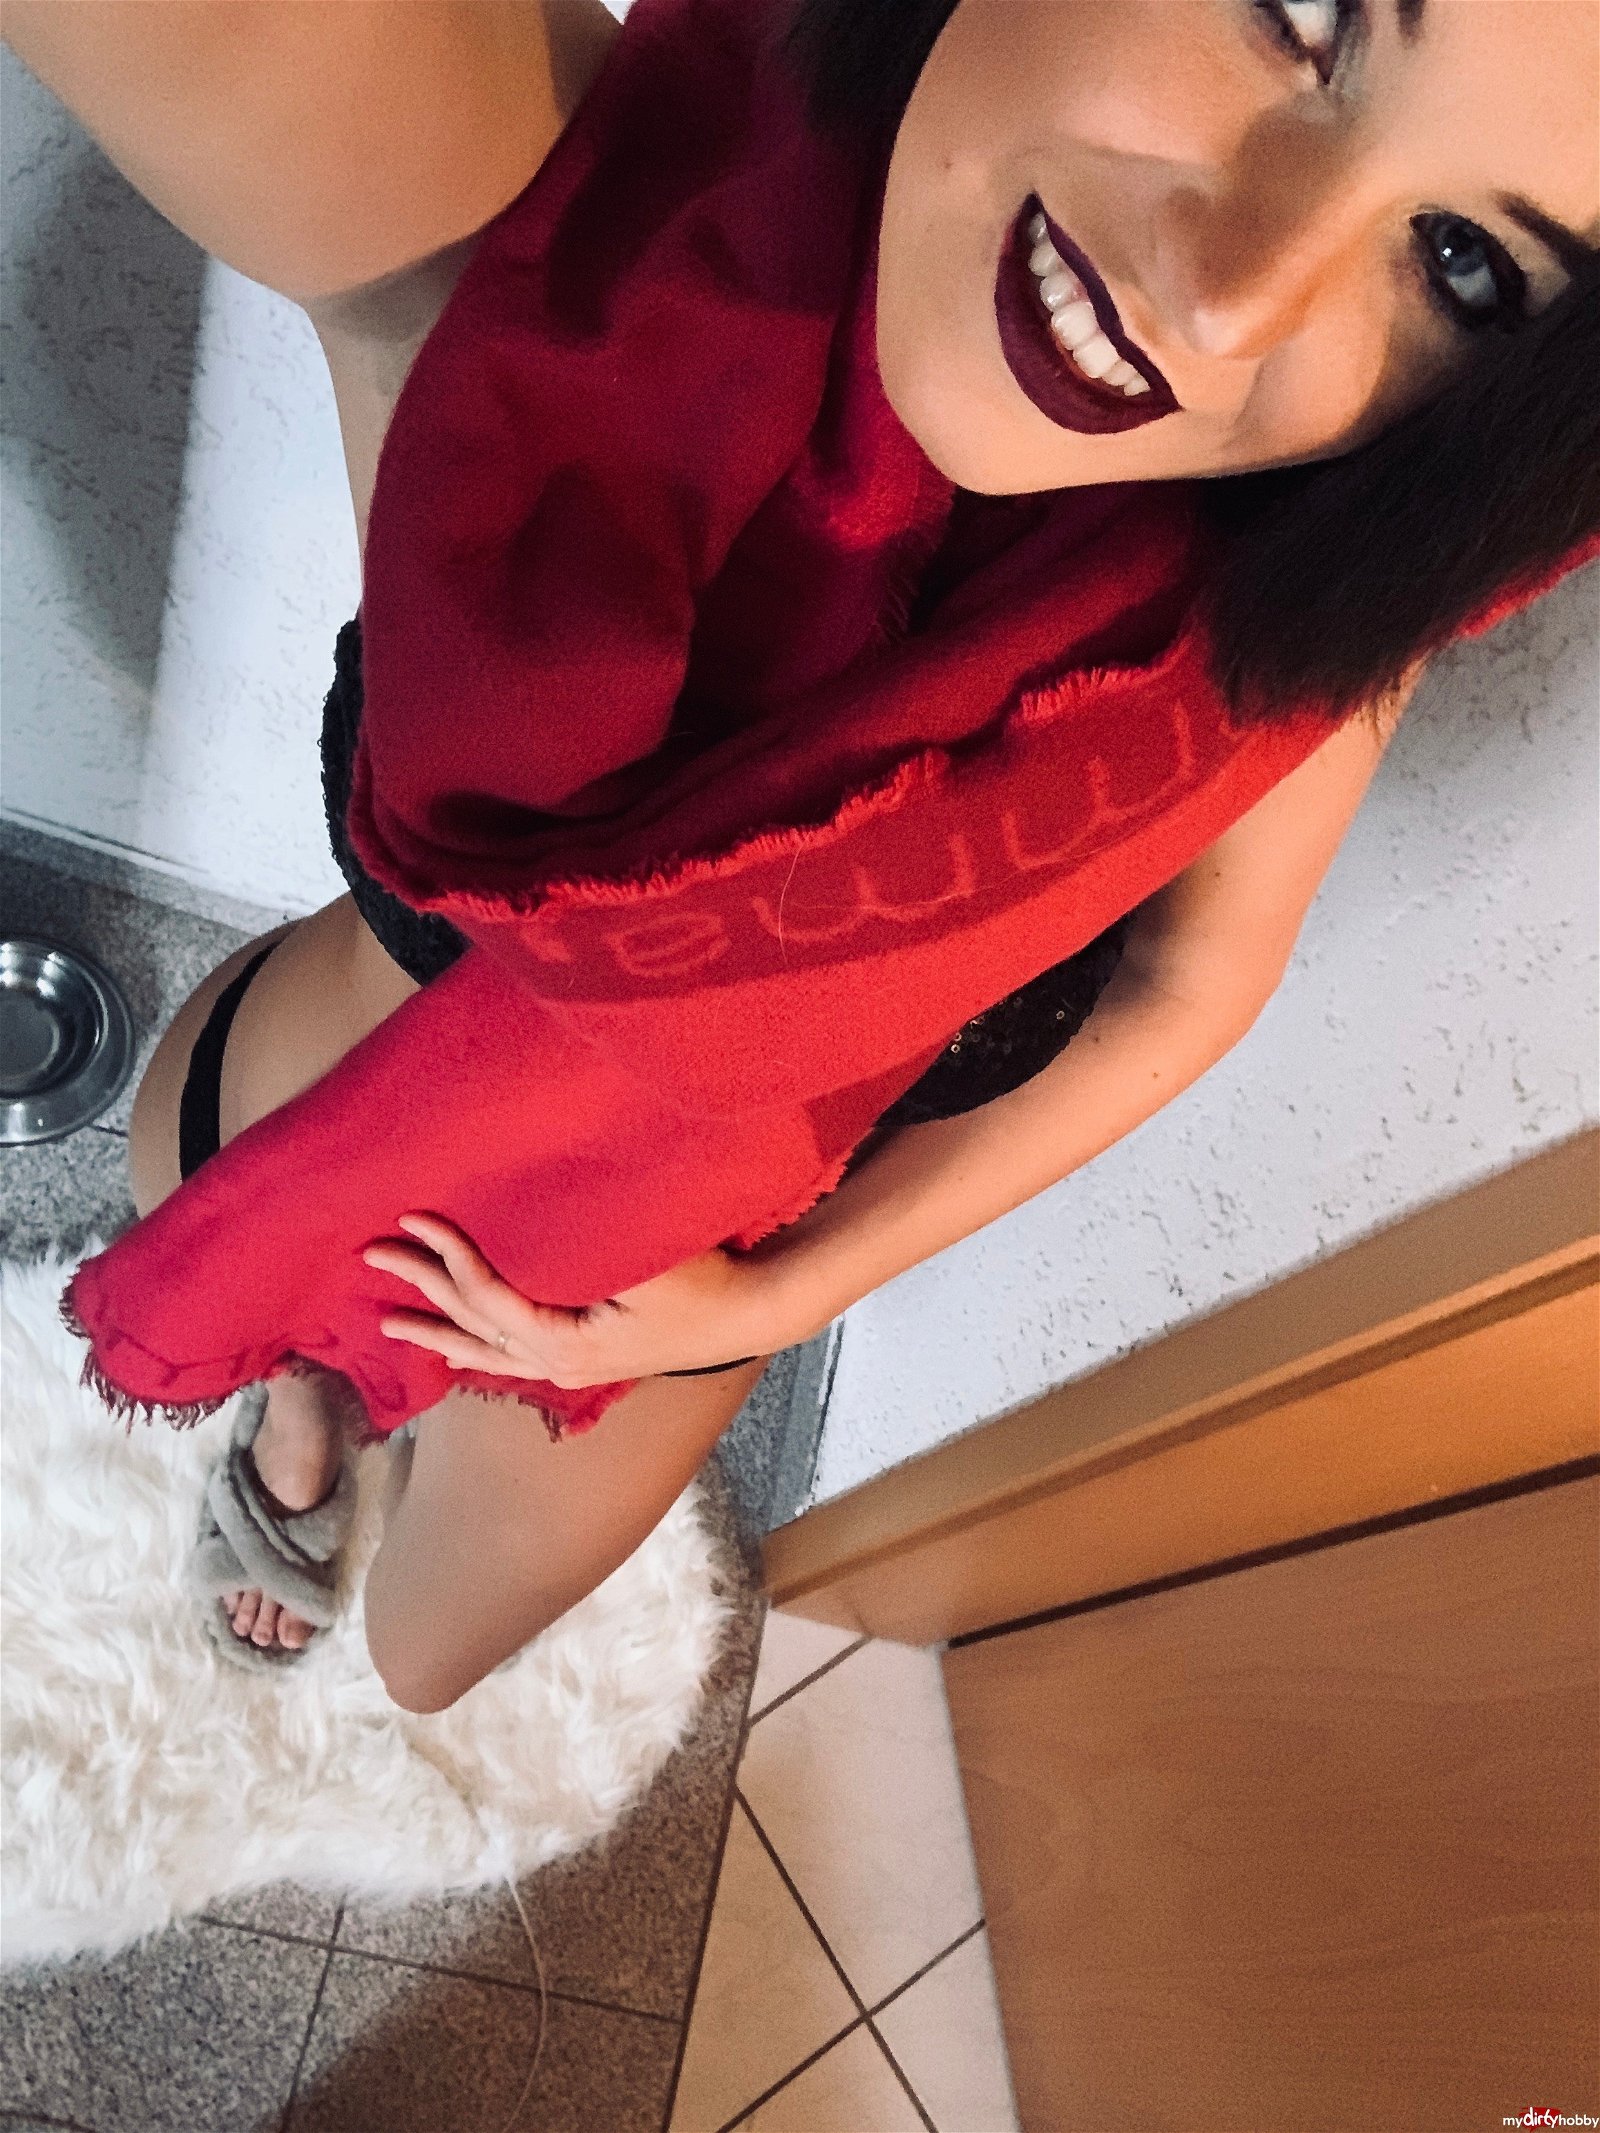 Photo by MyDirtyHobby Emily with the username @MyDirtyHobby, who is a brand user,  November 11, 2019 at 3:00 PM. The post is about the topic European and the text says 'Check out the beautiful #JinKing !

Catch her on #MyDirtyHobby! 

#mdh #mydirtyhobby'